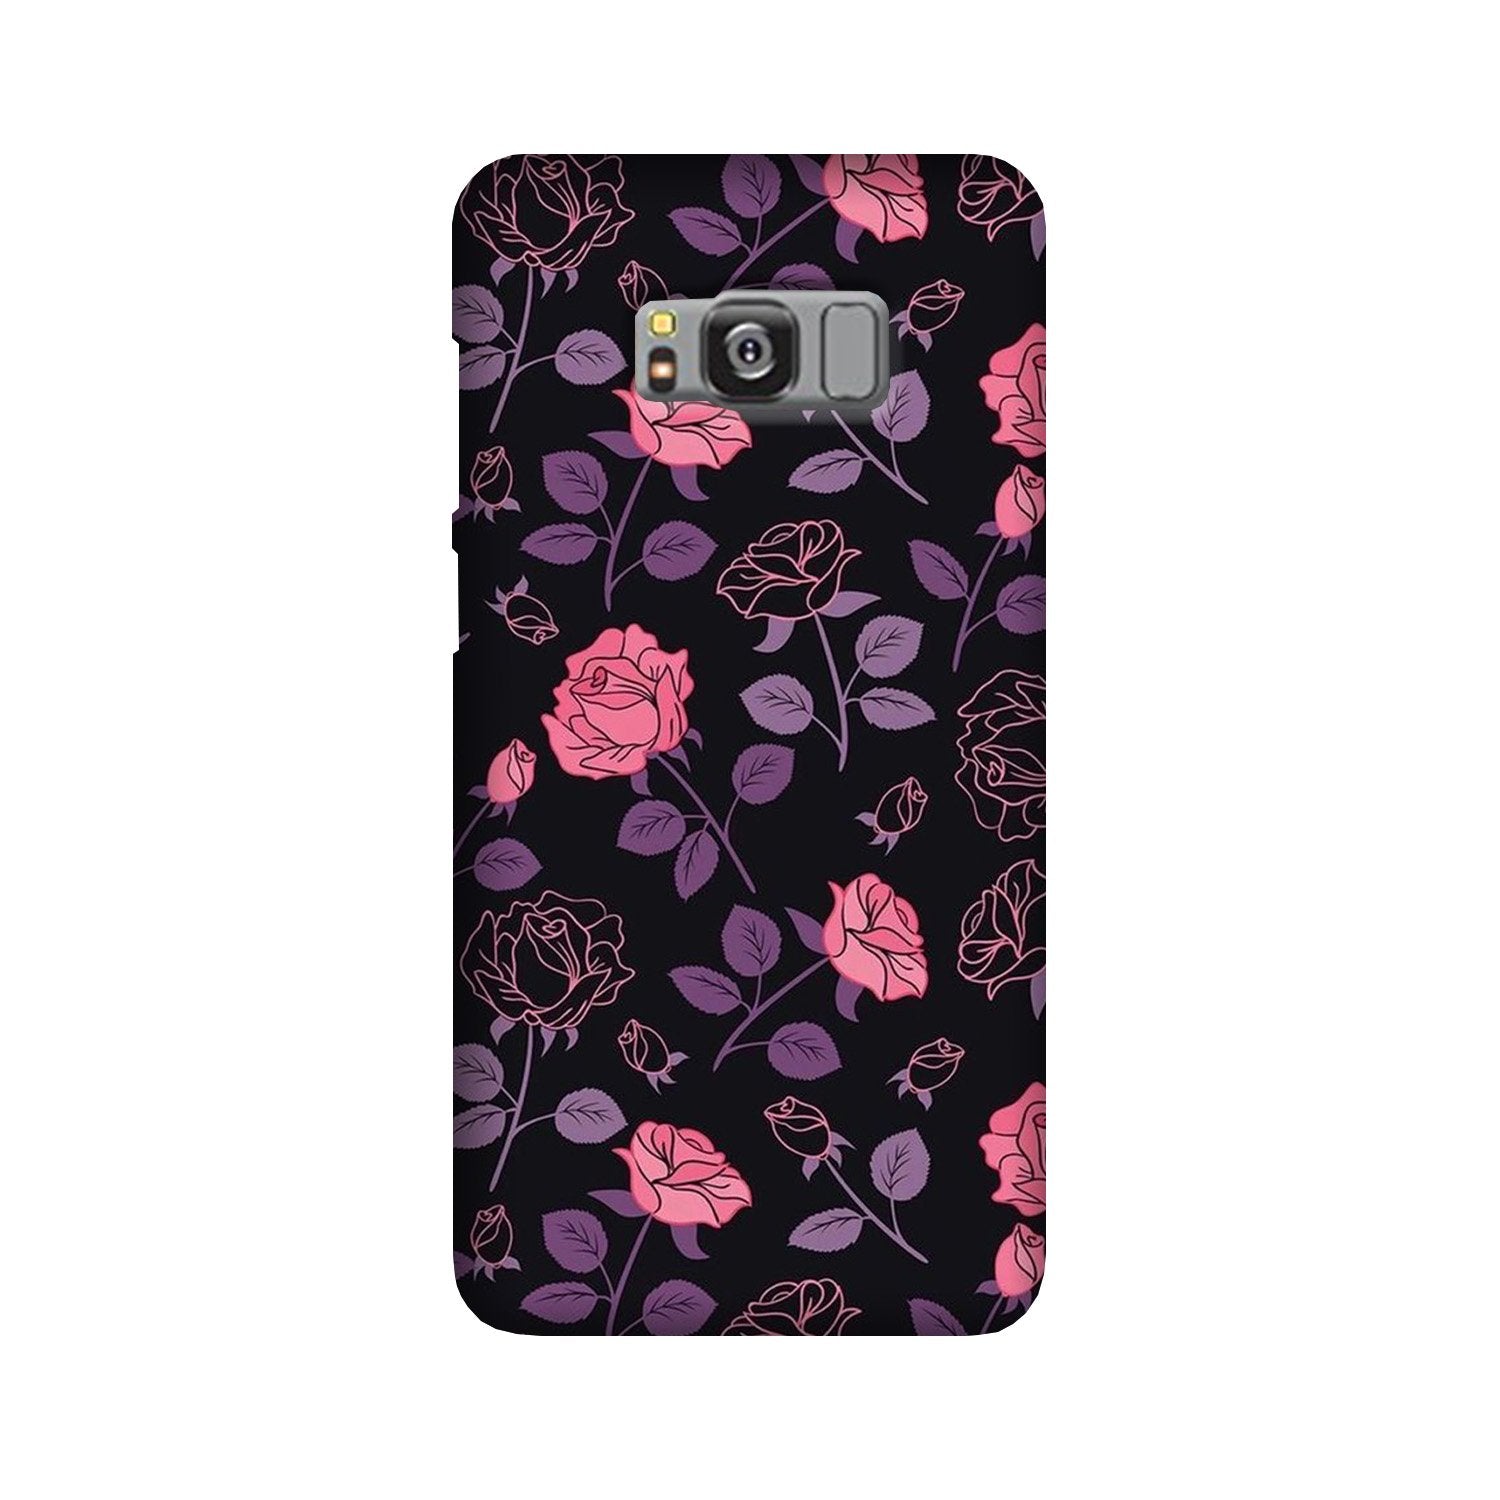 Rose Black Background Case for Galaxy S8